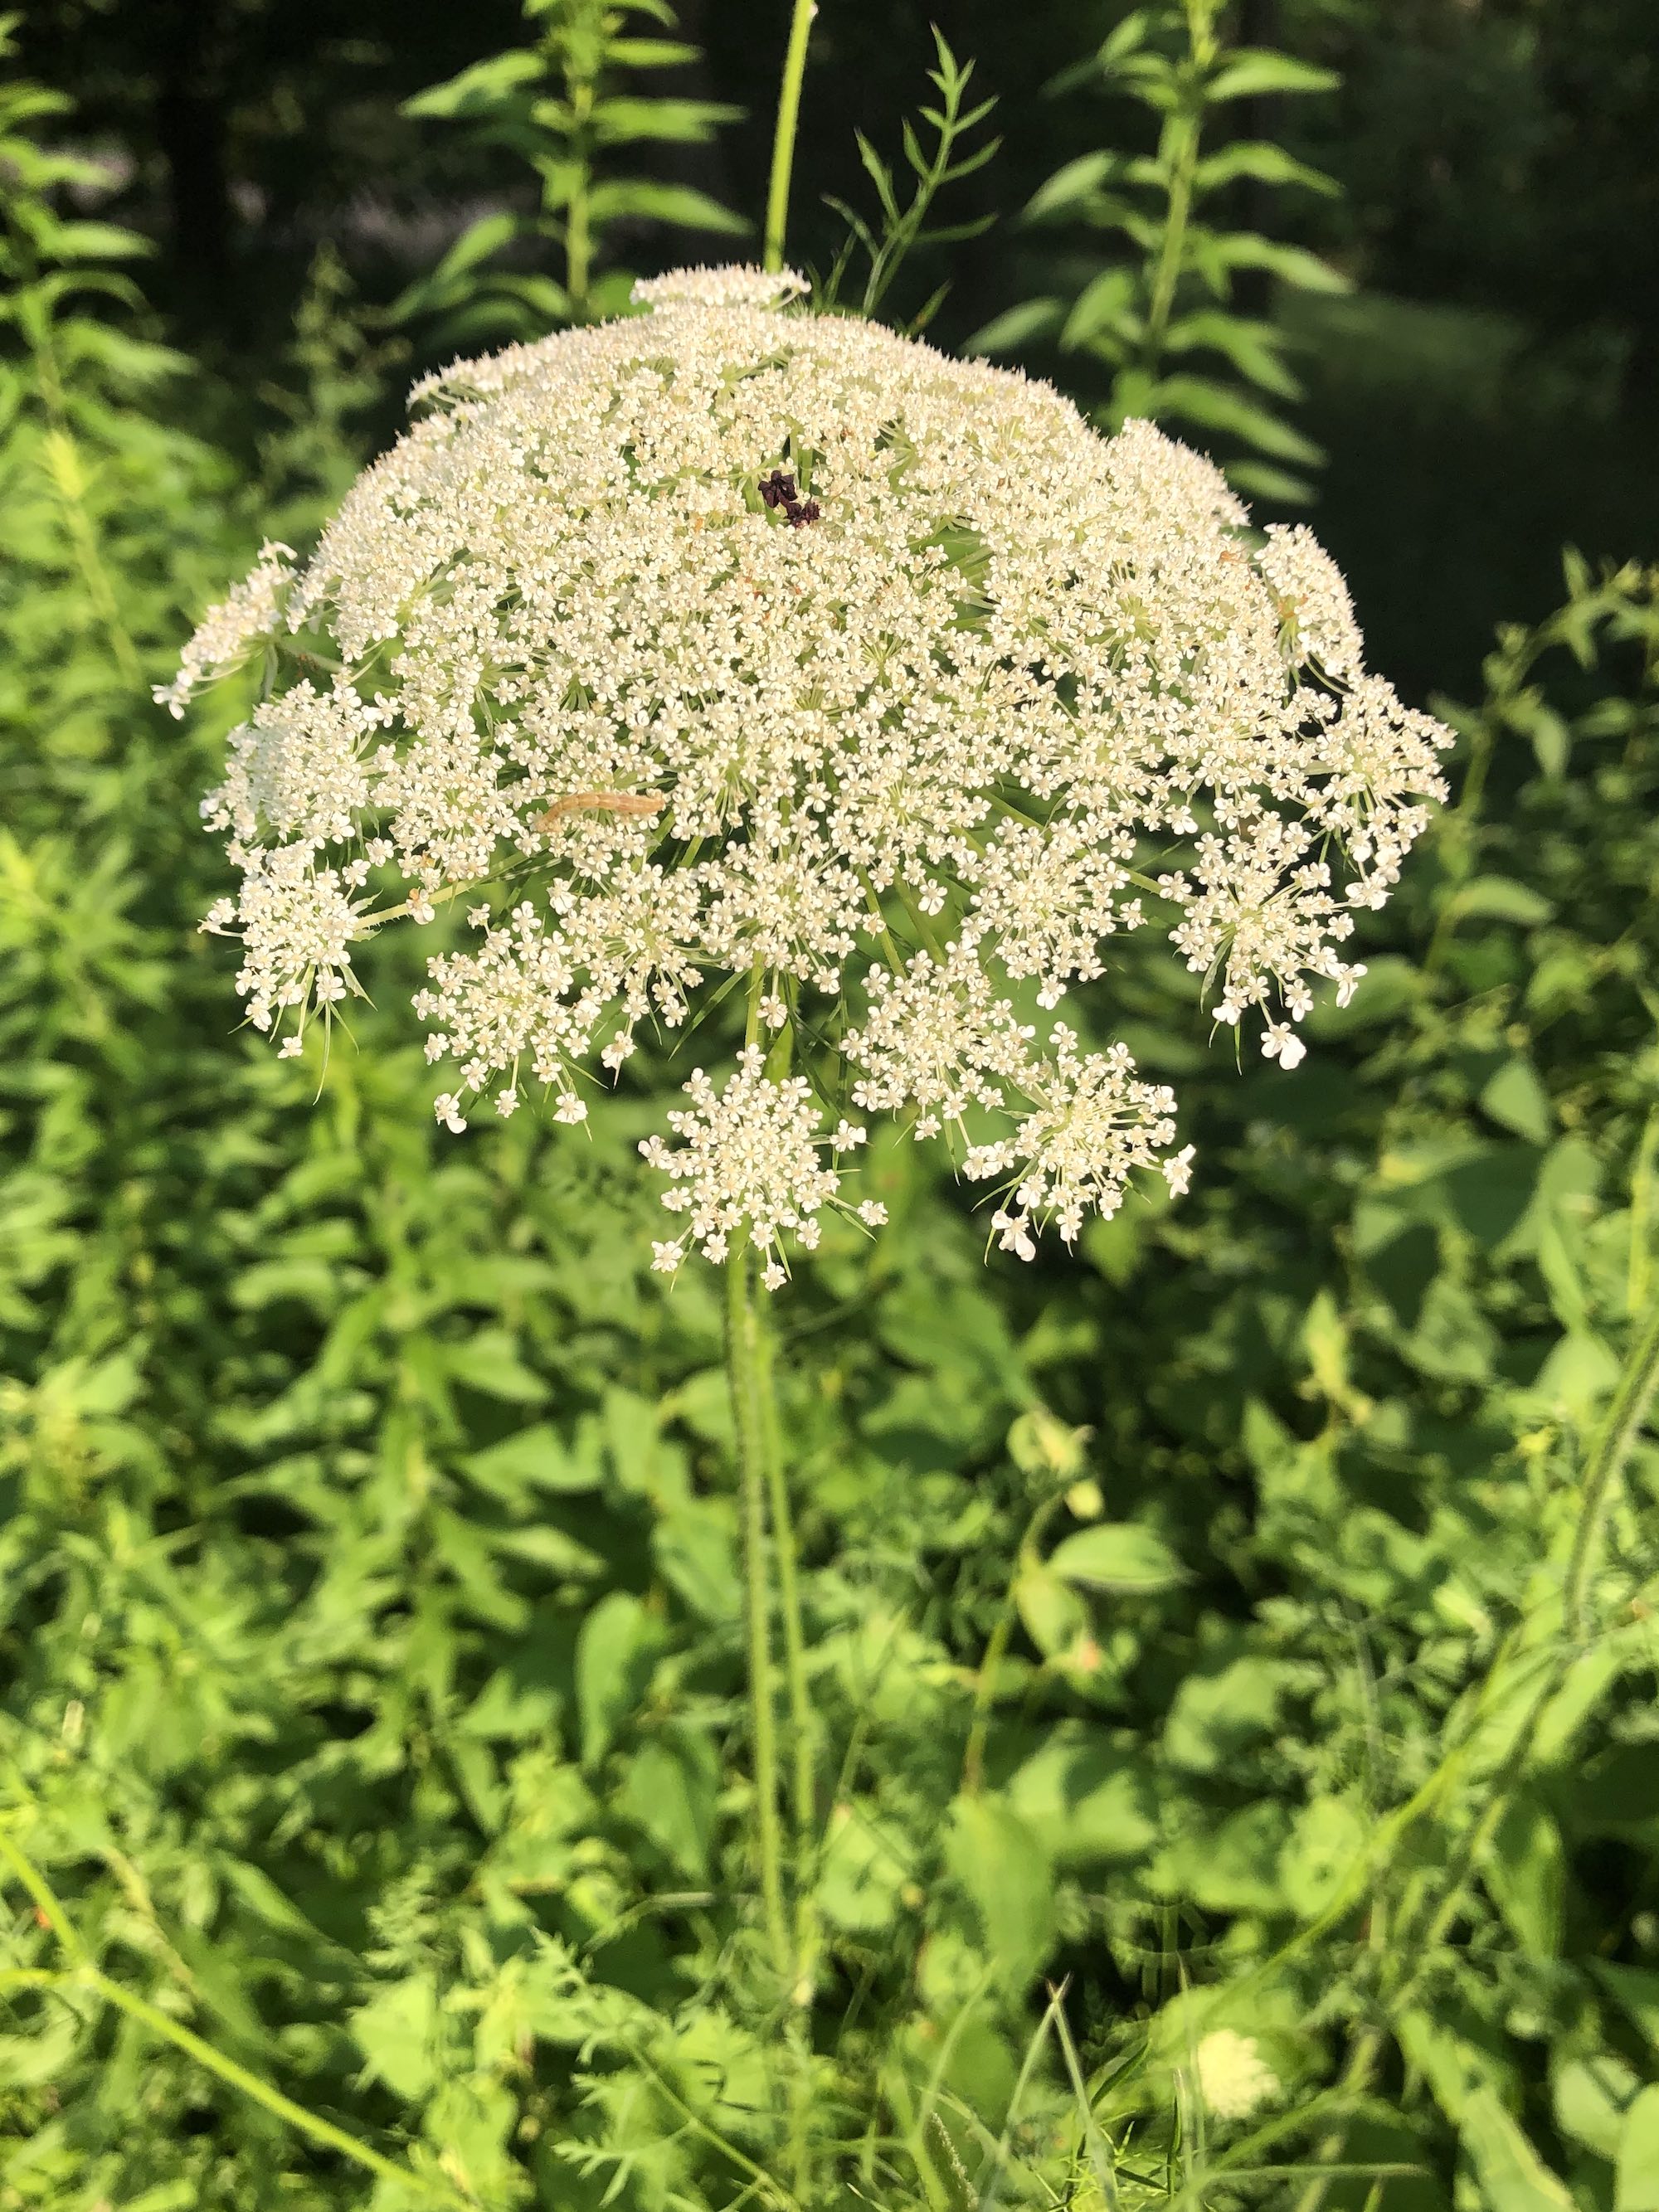 Queen Anne's Lace on bank of retaining pond on the corner of Nakoma Road and Manitou Way in Madison, WI on July 9, 2020.